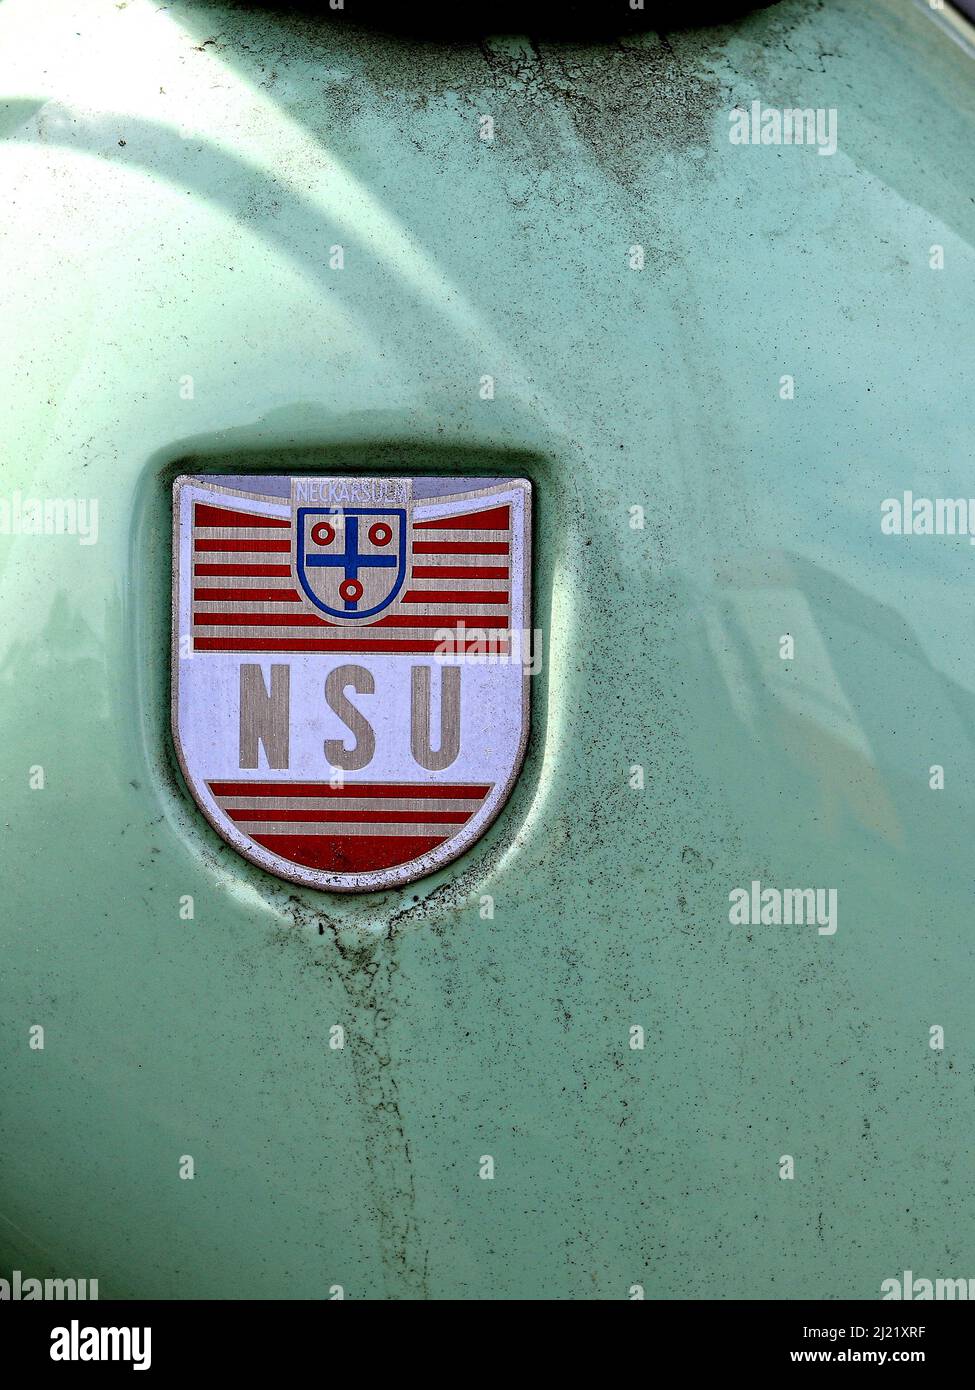 nsu was an engine brand from germany the logo of the company is on a green bonnet the plants of nsu were in southern germany the company audi later de Stock Photo